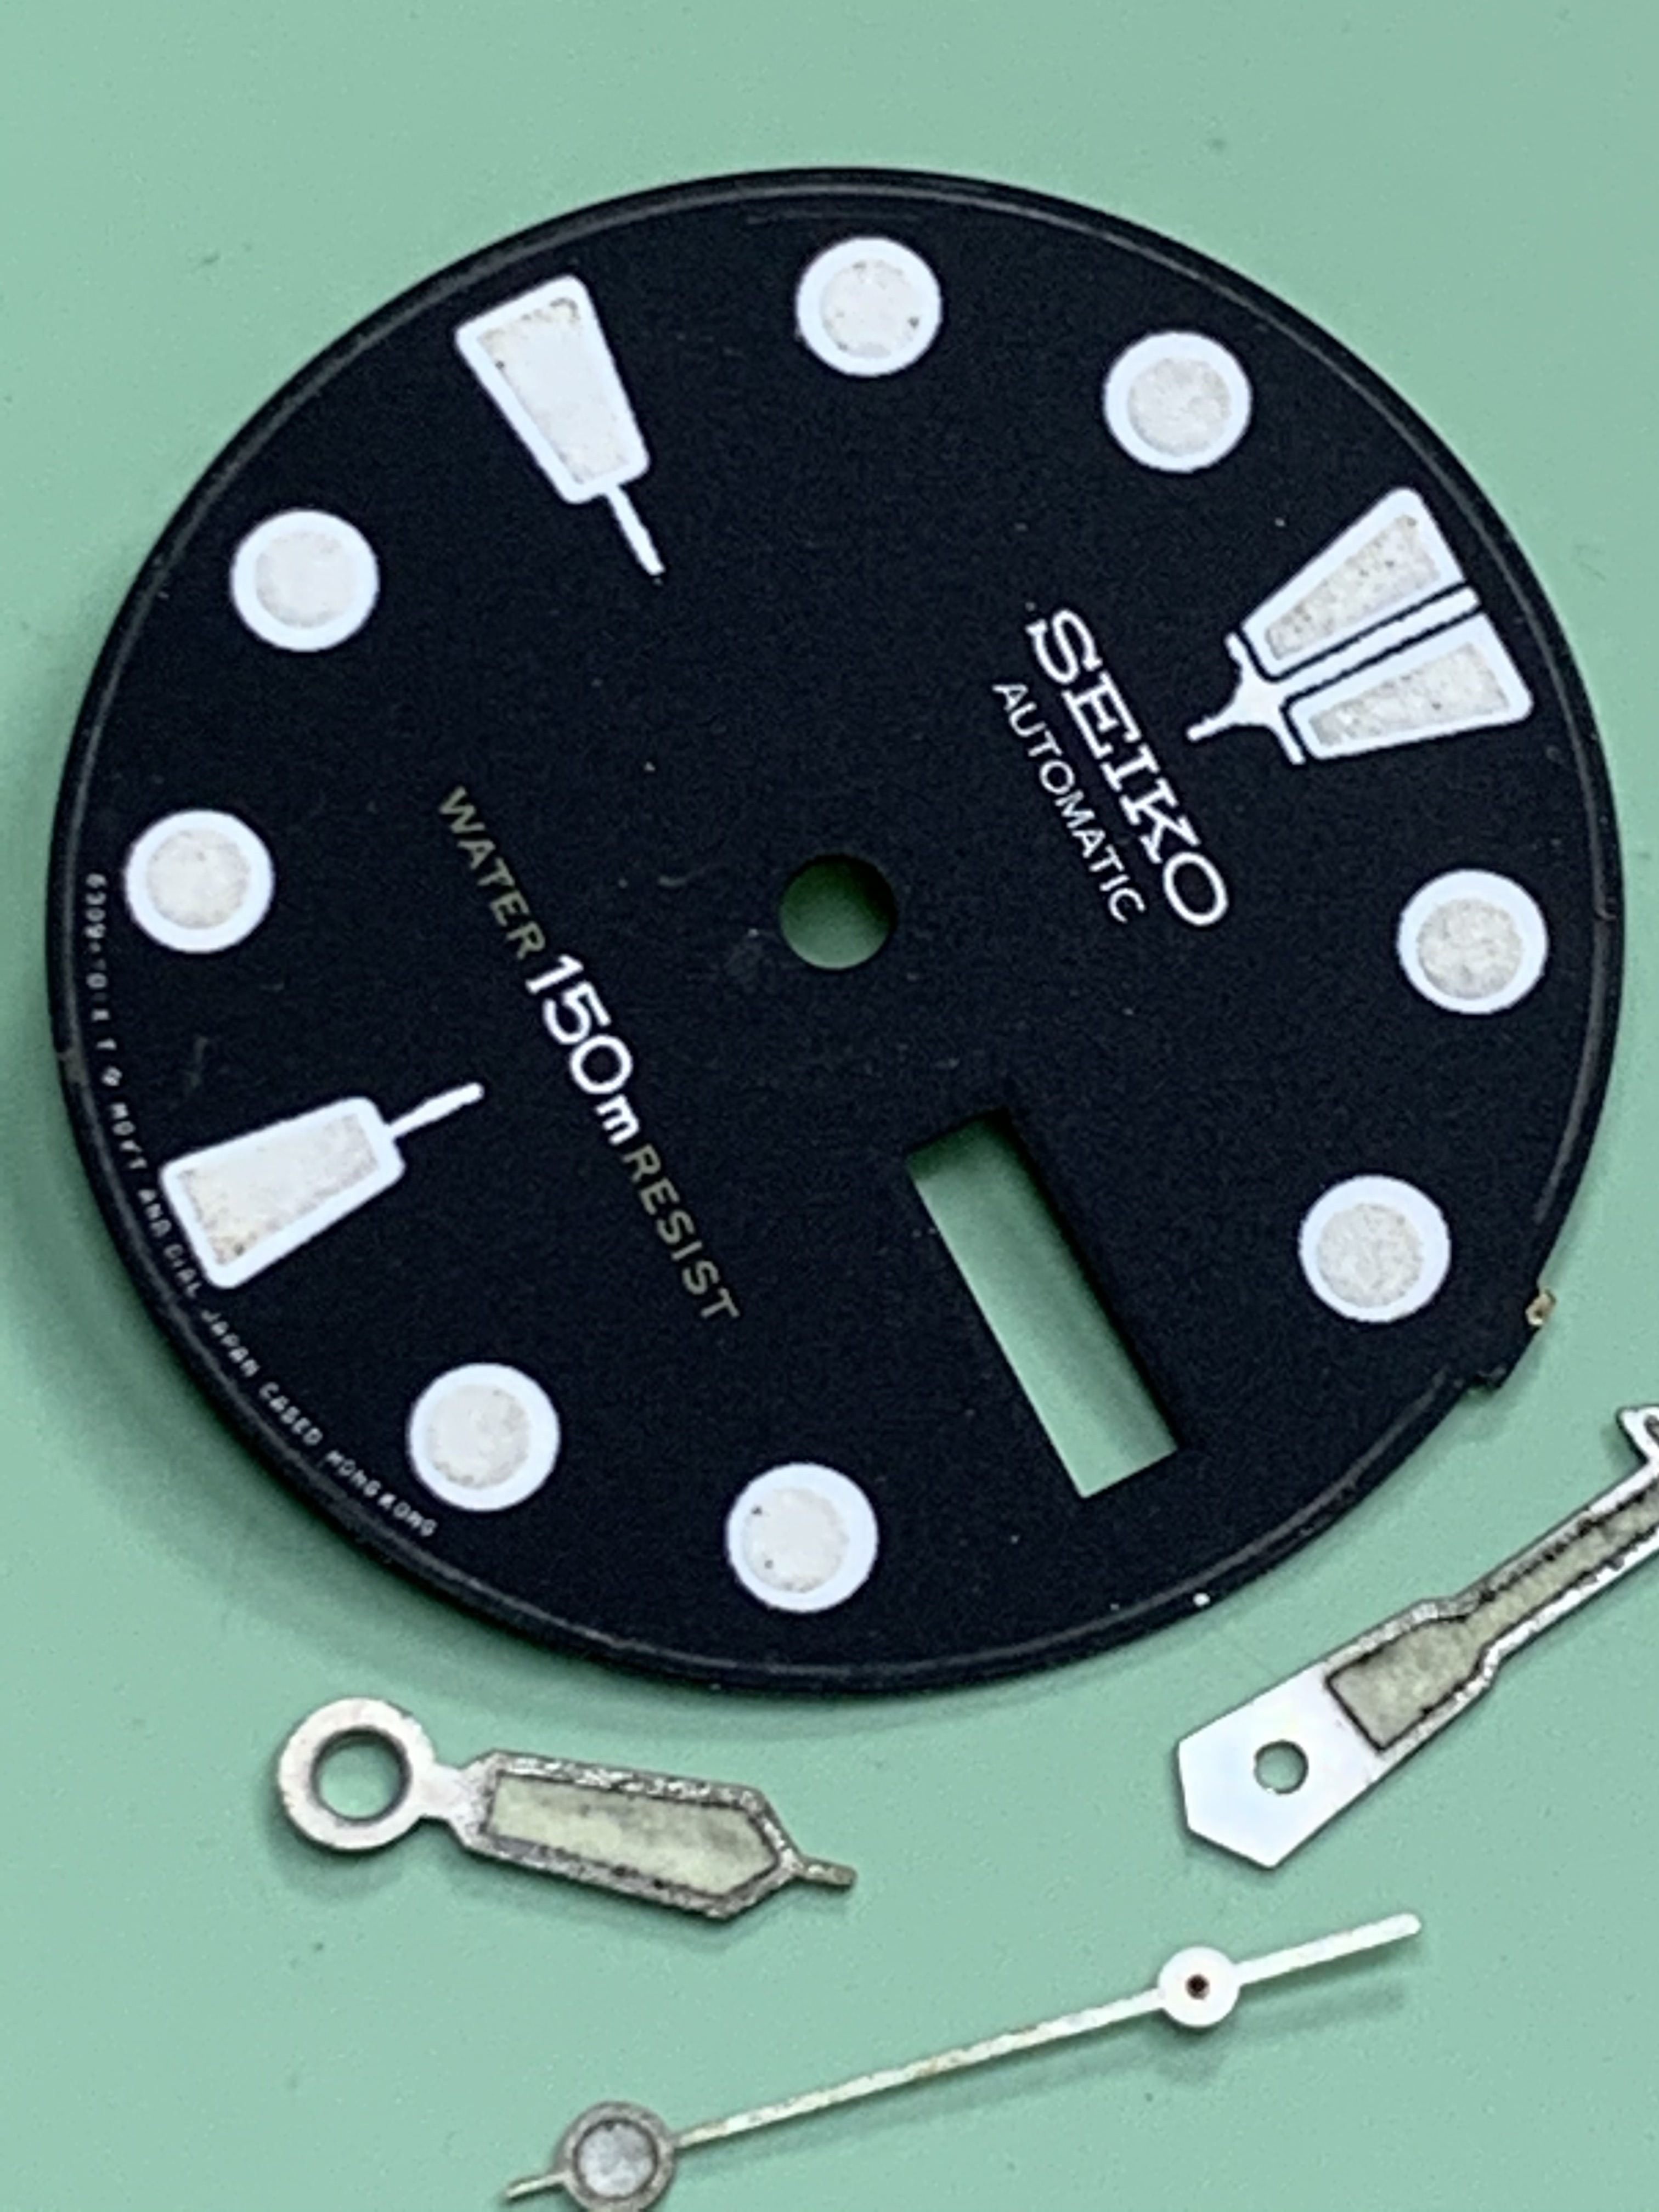 Service for a wide variety of Seiko movements